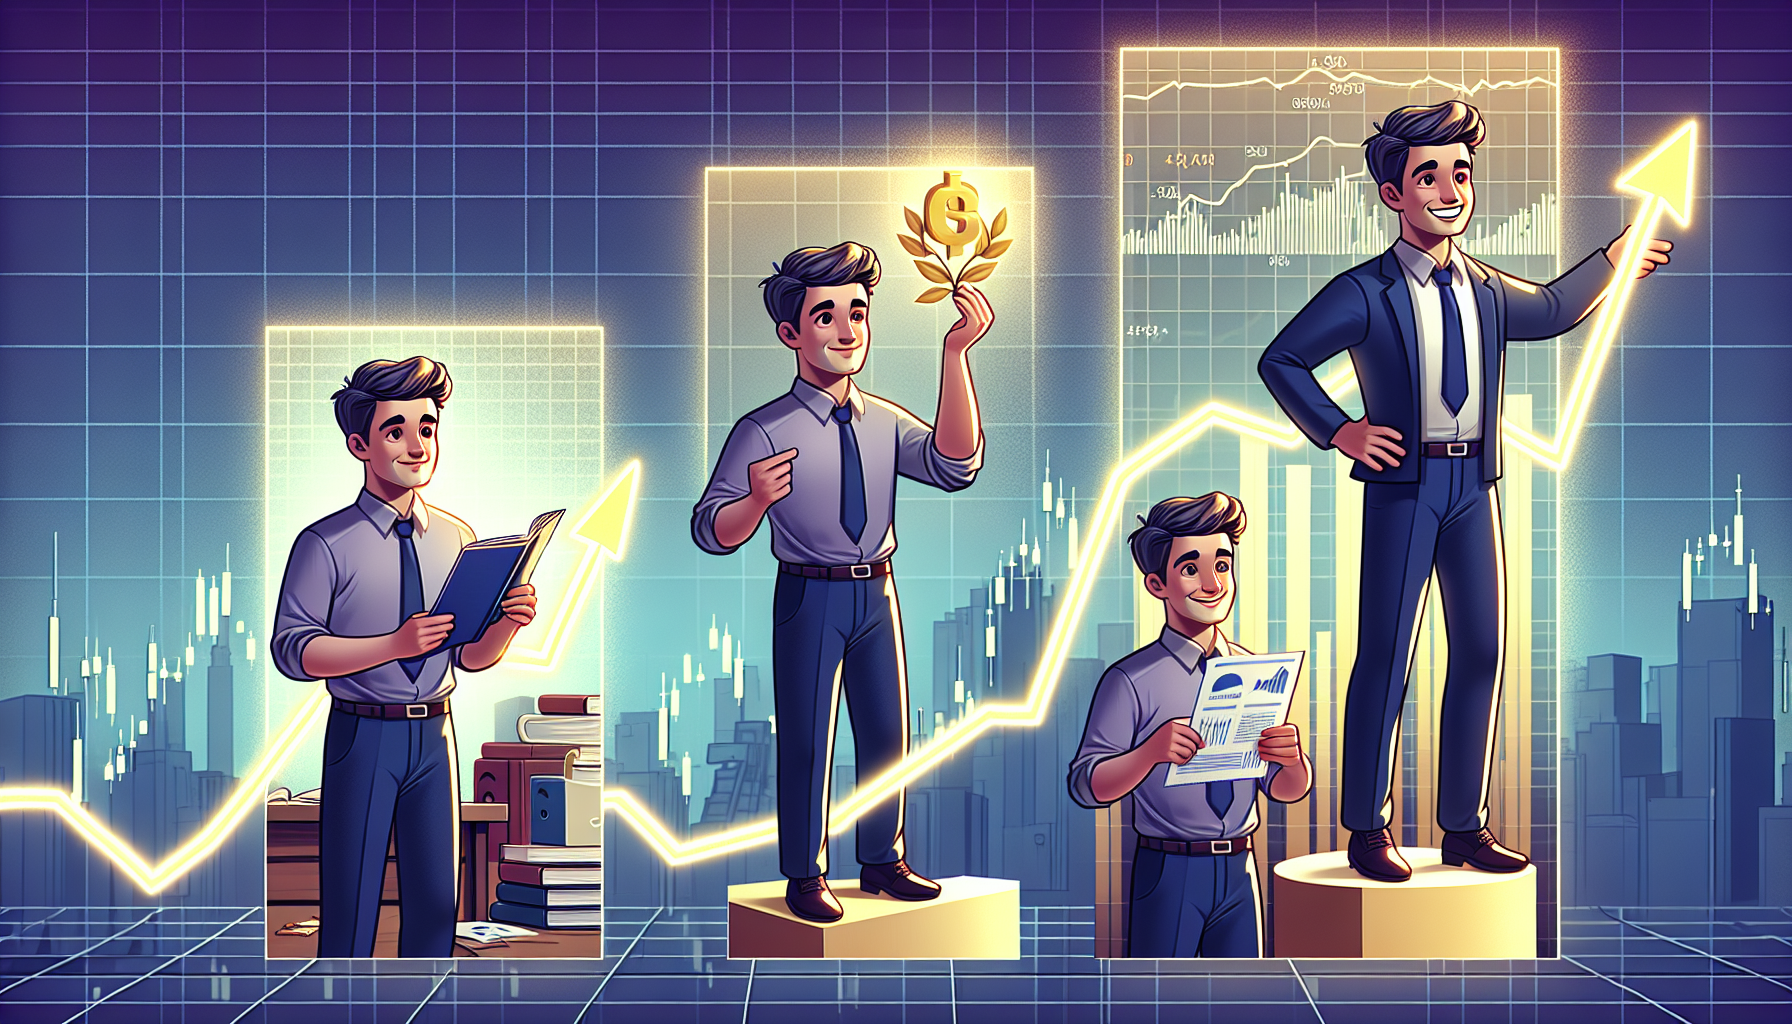 Illustration of a person exercising stock options